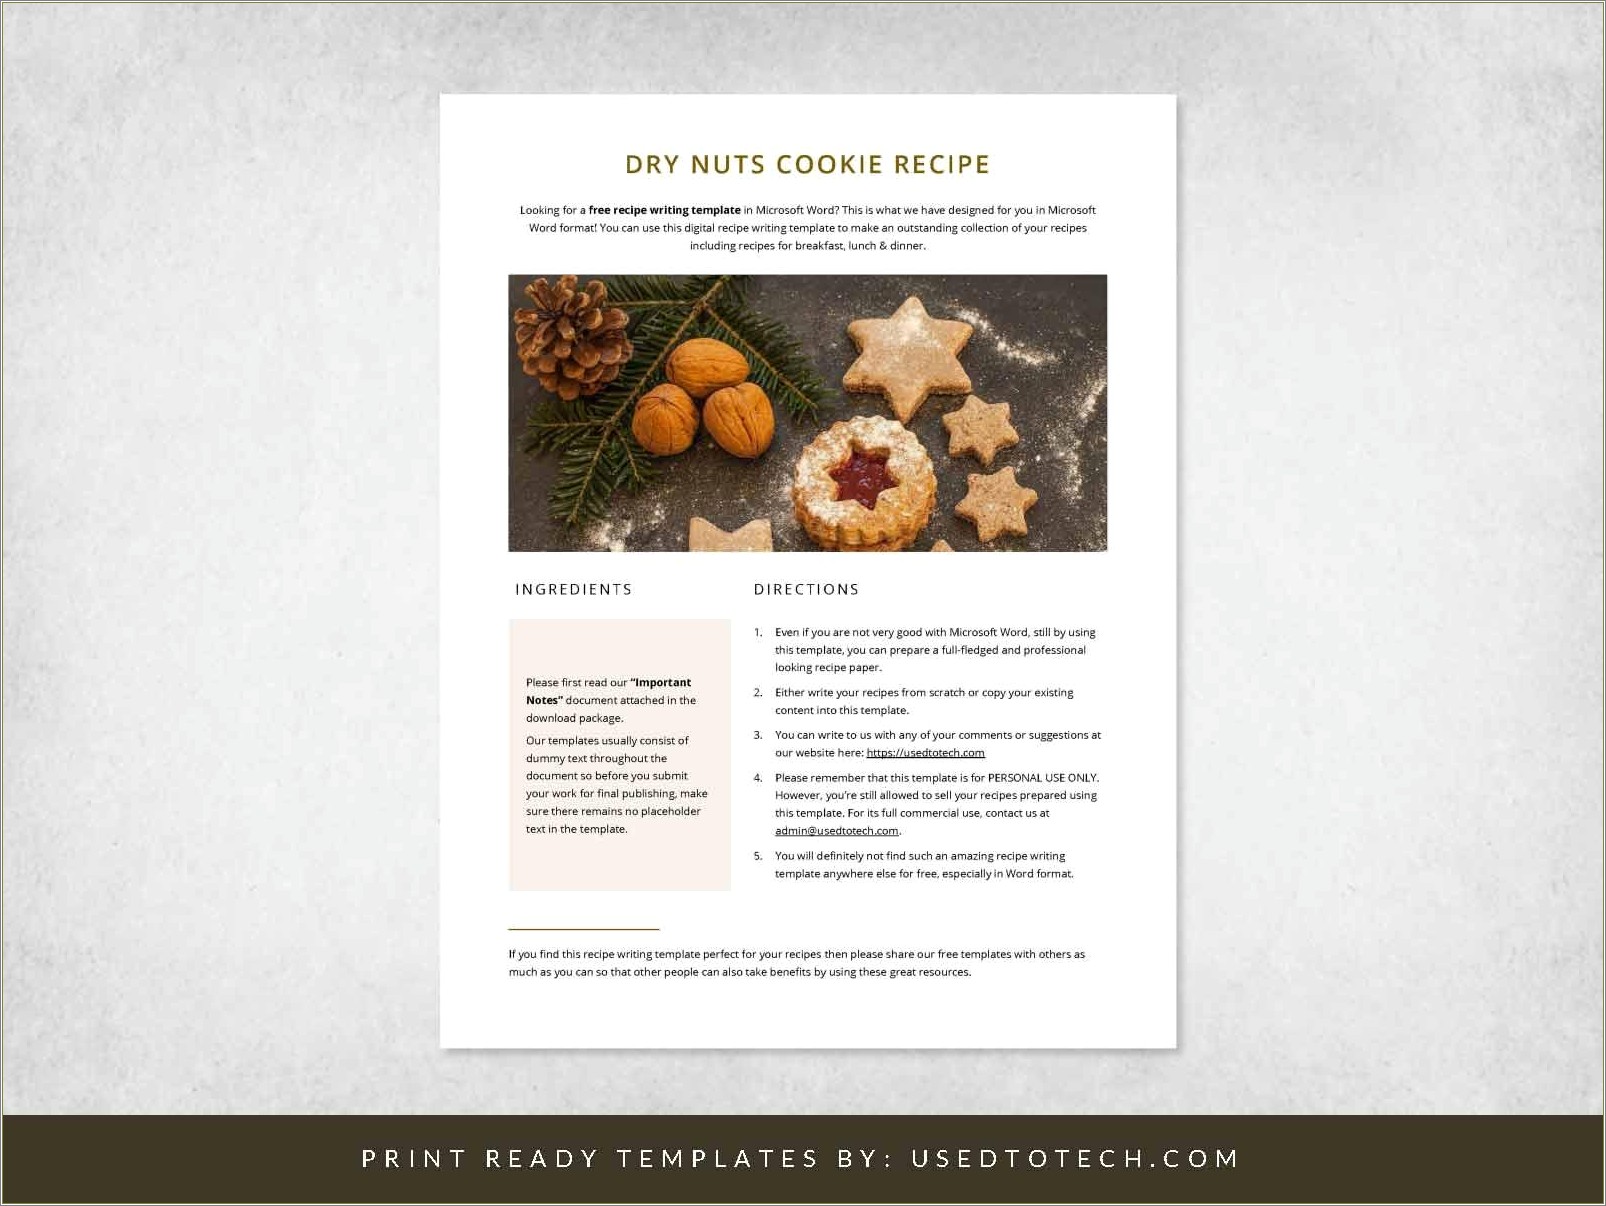 Free Half Page Recipe Templates For Word